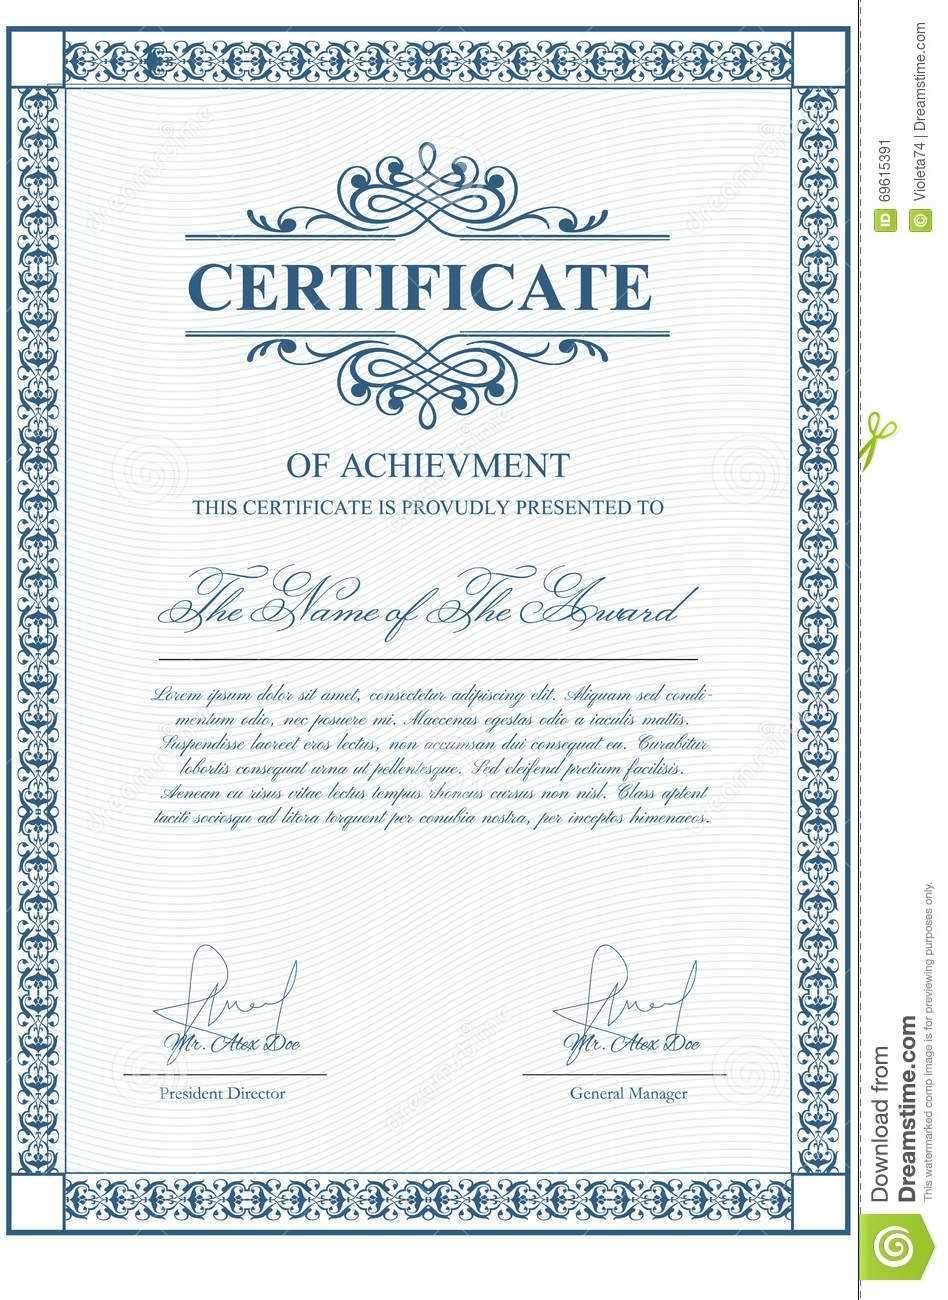 Certificate Template With Guilloche Elements. Stock Vector Within Validation Certificate Template